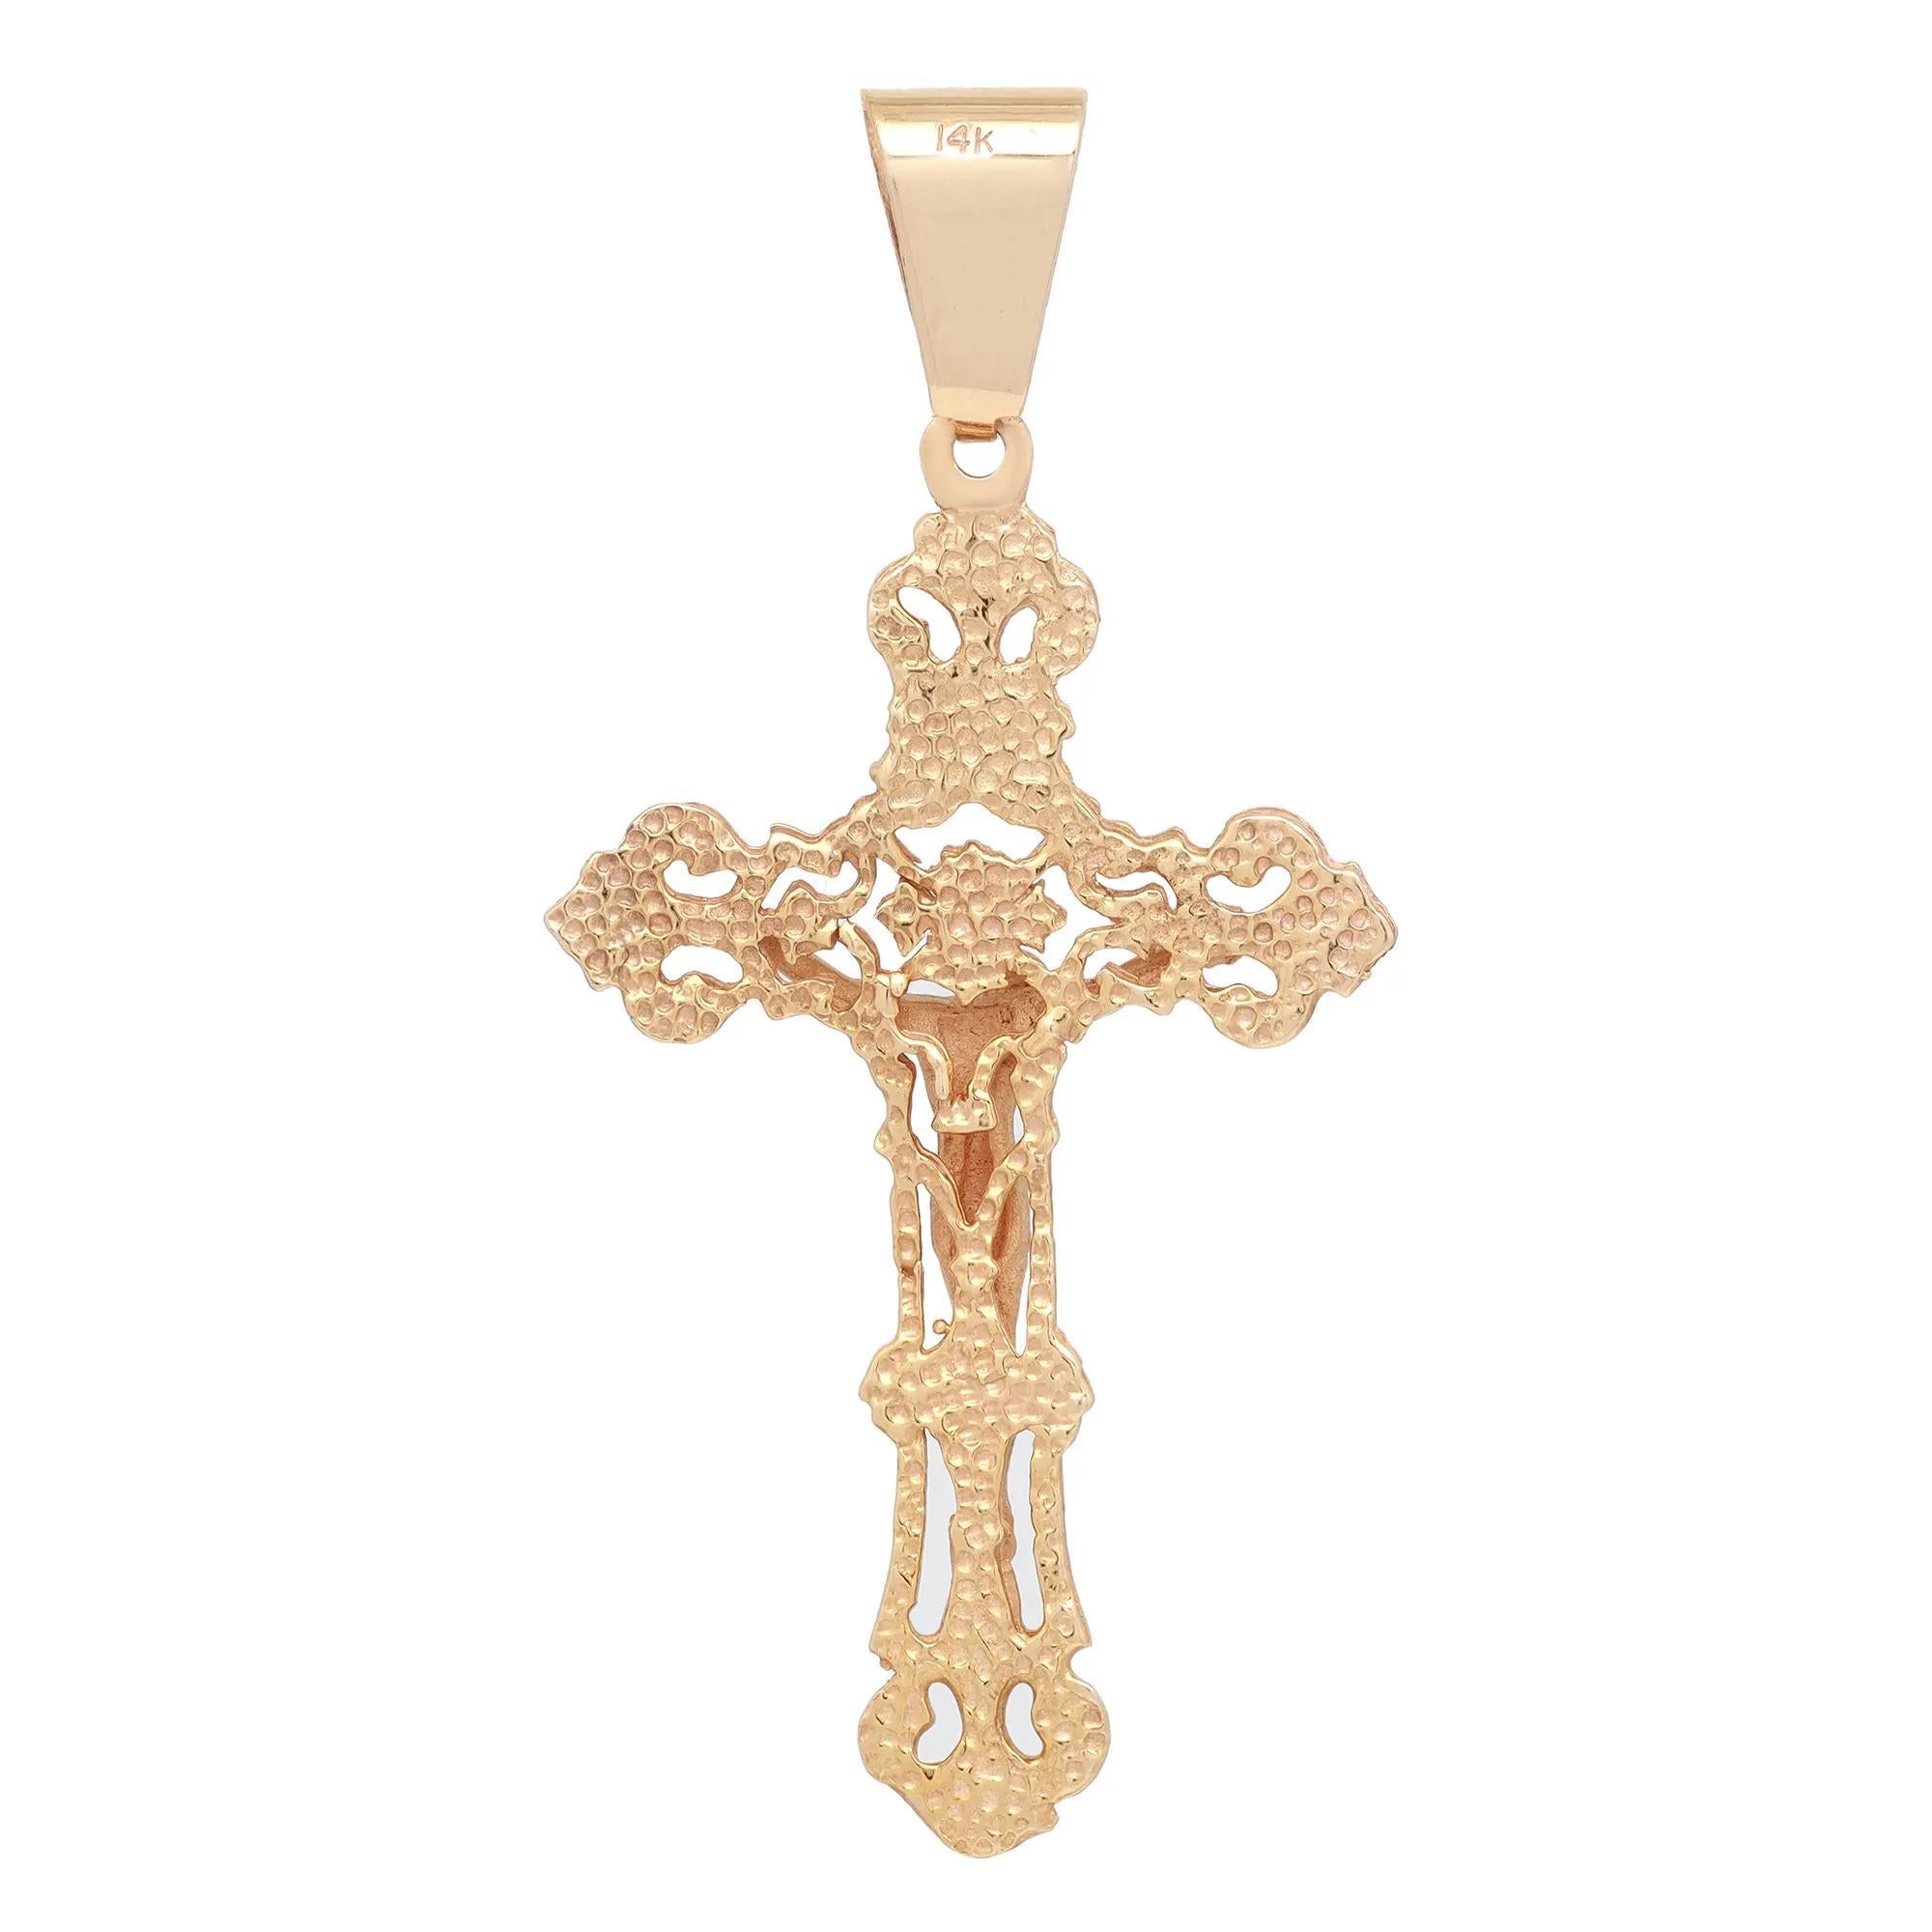 This meaningful cross pendant shines in lustrous 14K yellow gold. Features a crucifix filigree cross pendant. Pendant size: 2.5 inches x 1.3 inches. Total weight: 6.30 grams. Minimalist and stylish, perfect for everyday wear. Comes with a